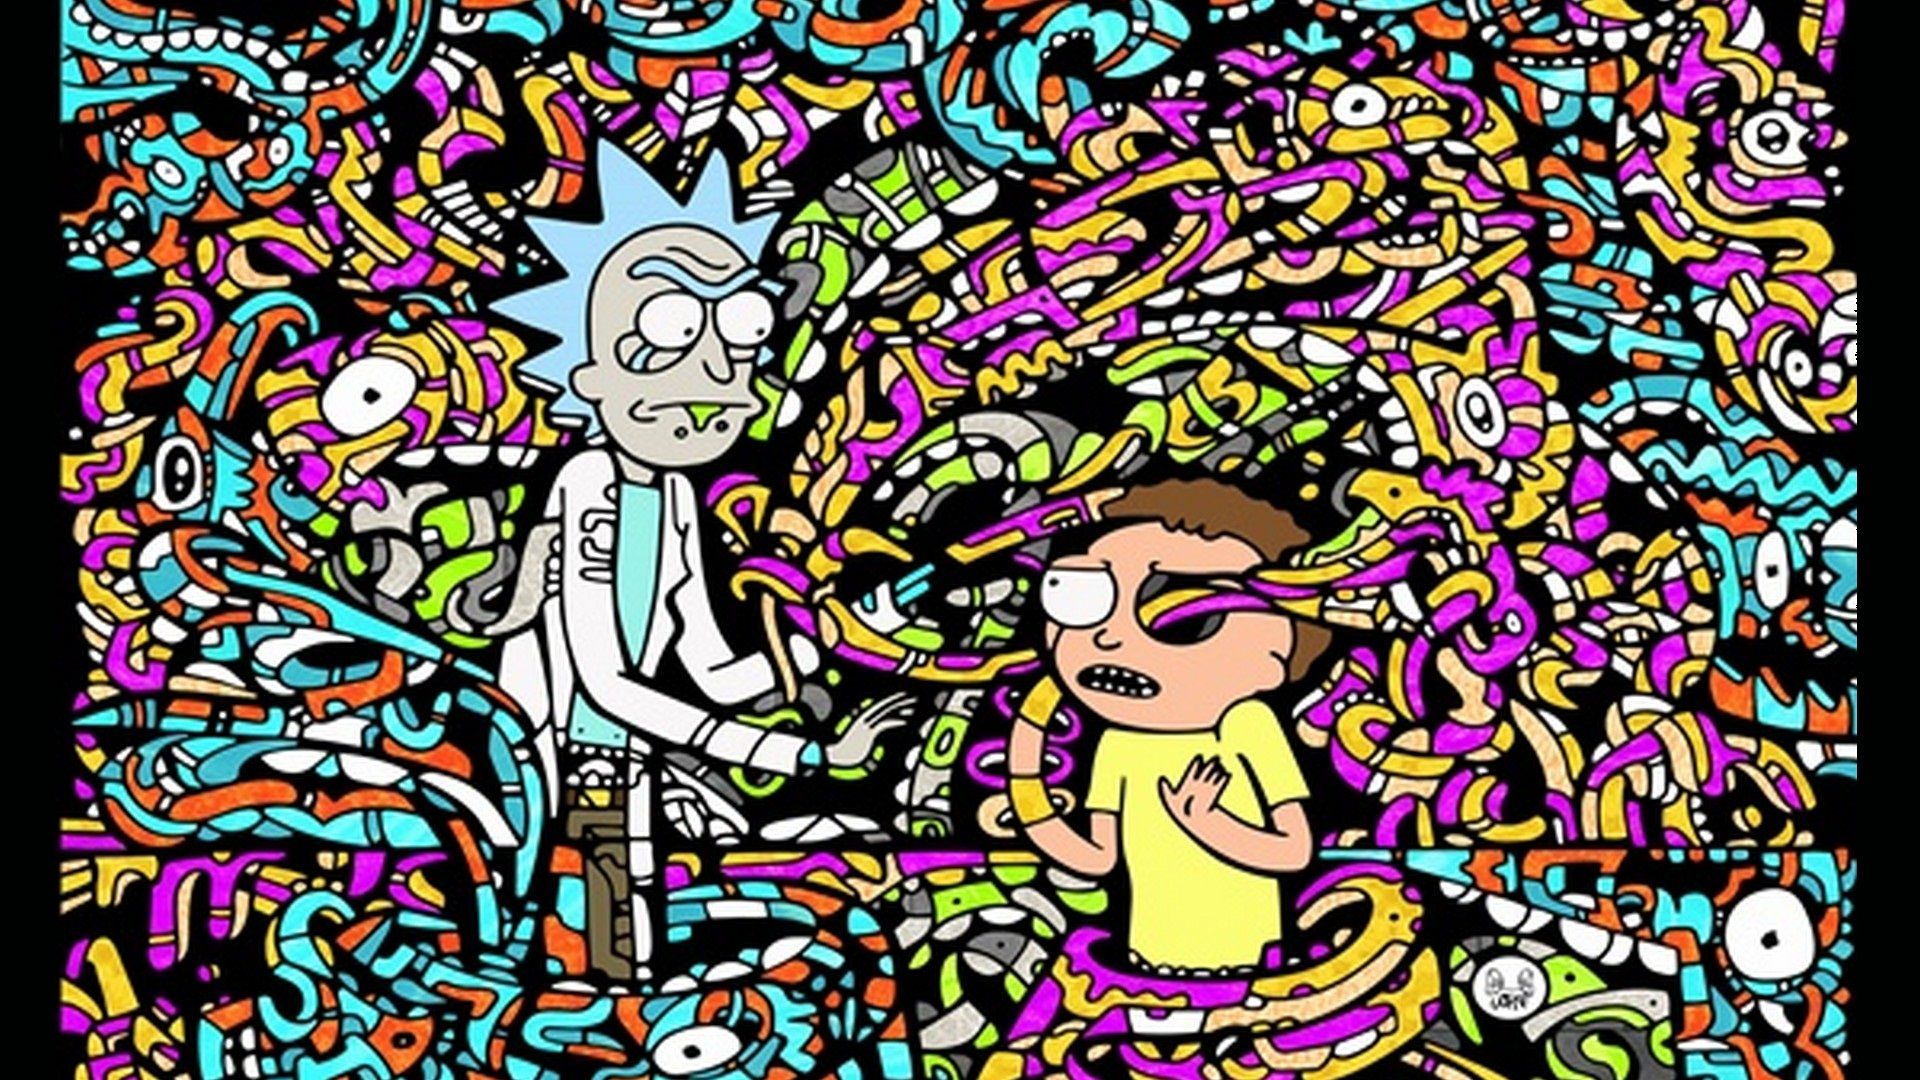 Trippy Rick And Morty Wallpaper